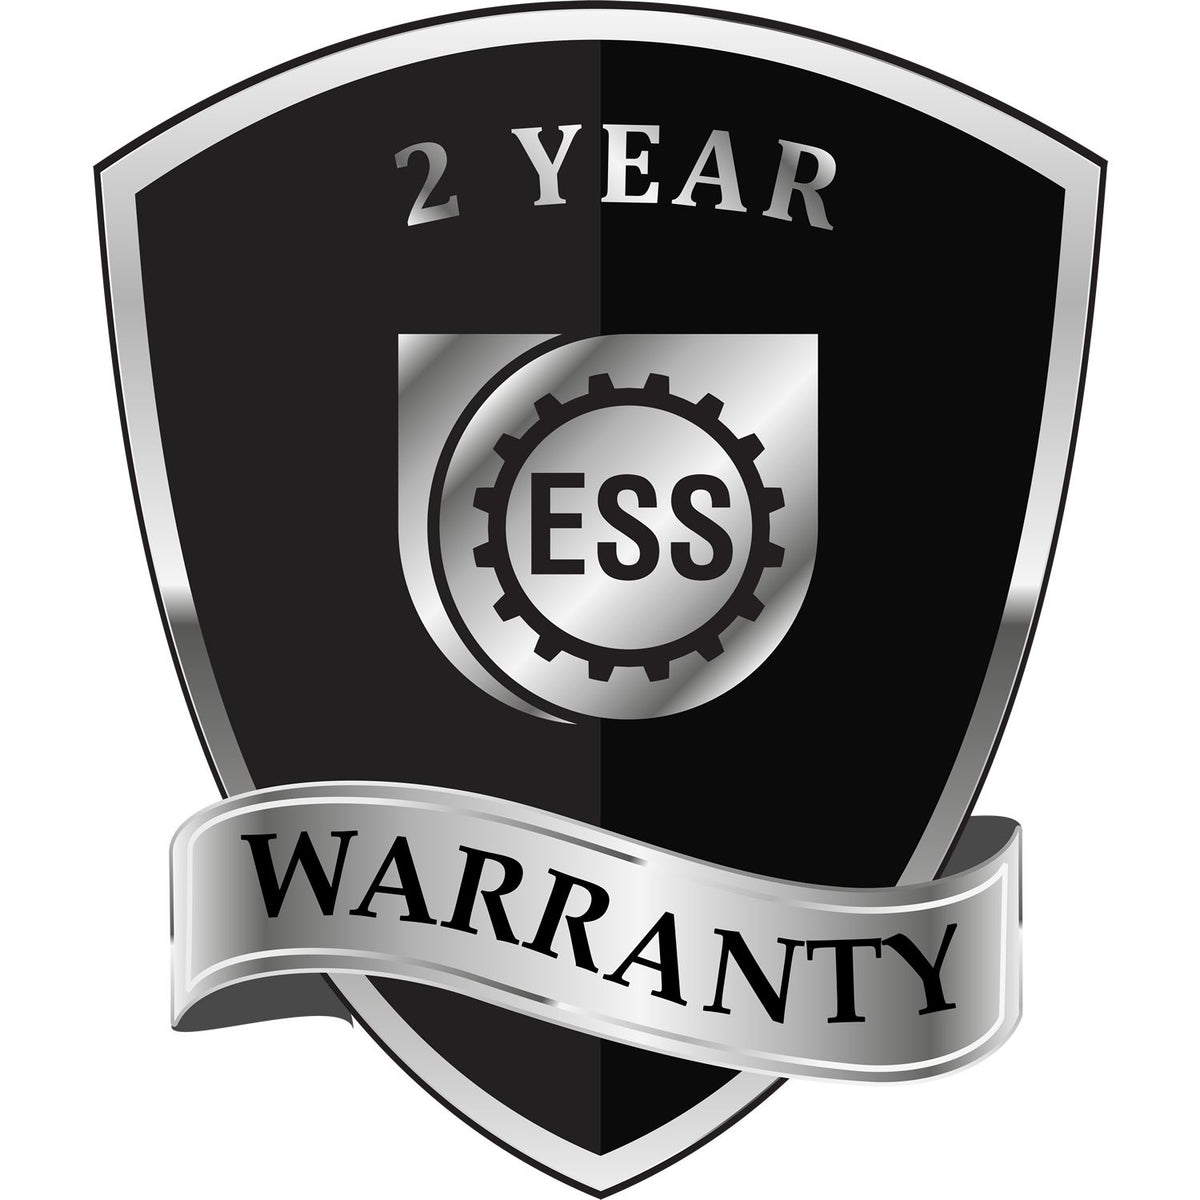 A badge or emblem showing a warranty icon for the Soft South Carolina Professional Engineer Seal